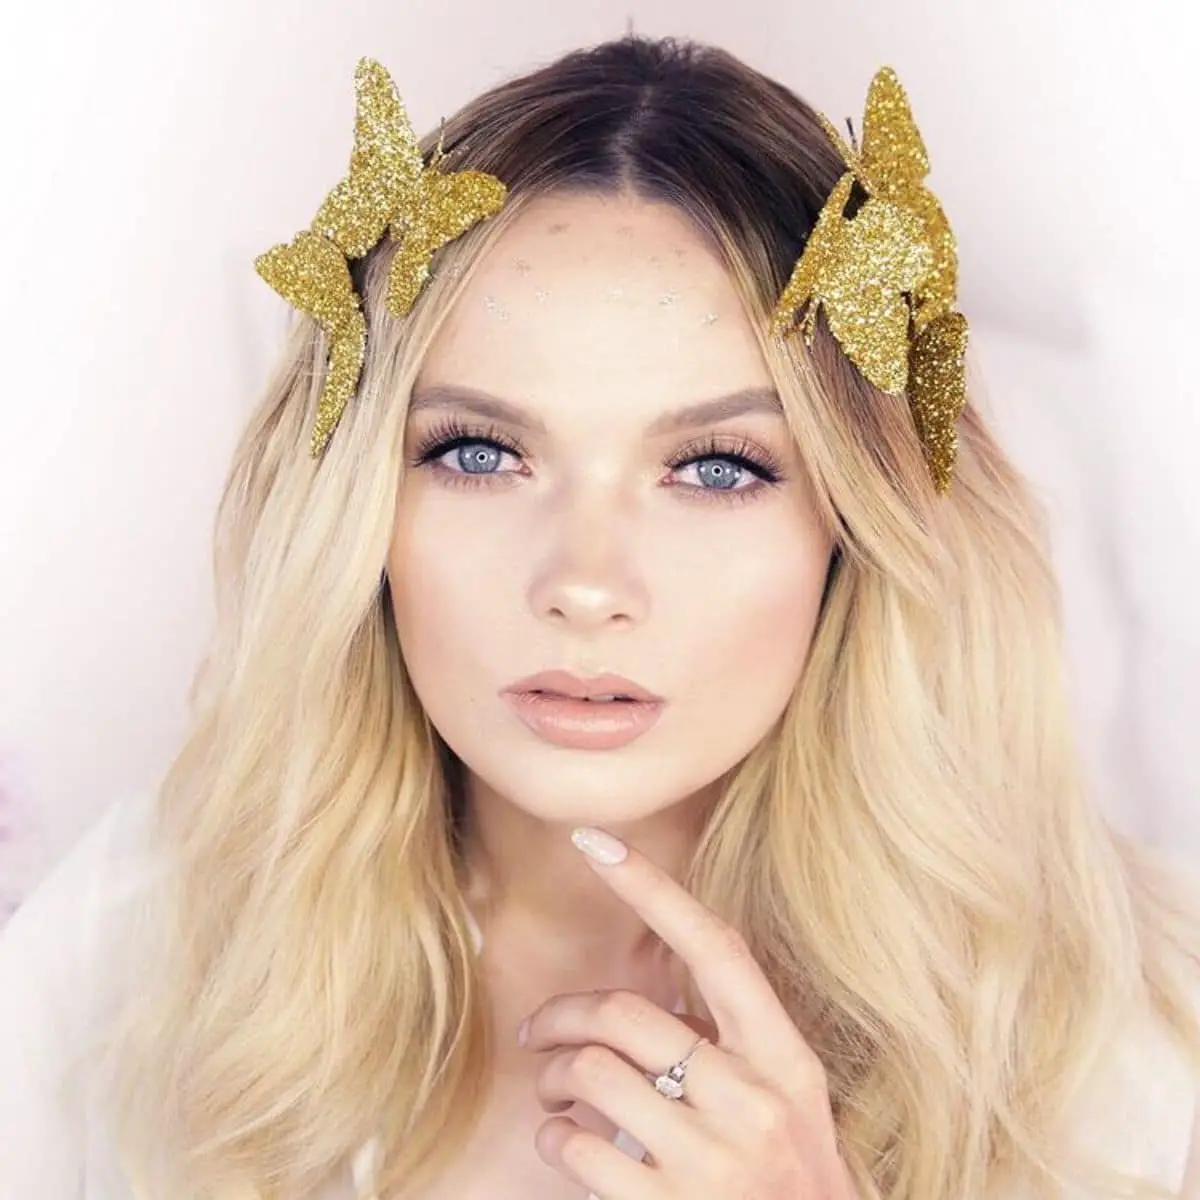 Snapchat Butterfly Filter makeup